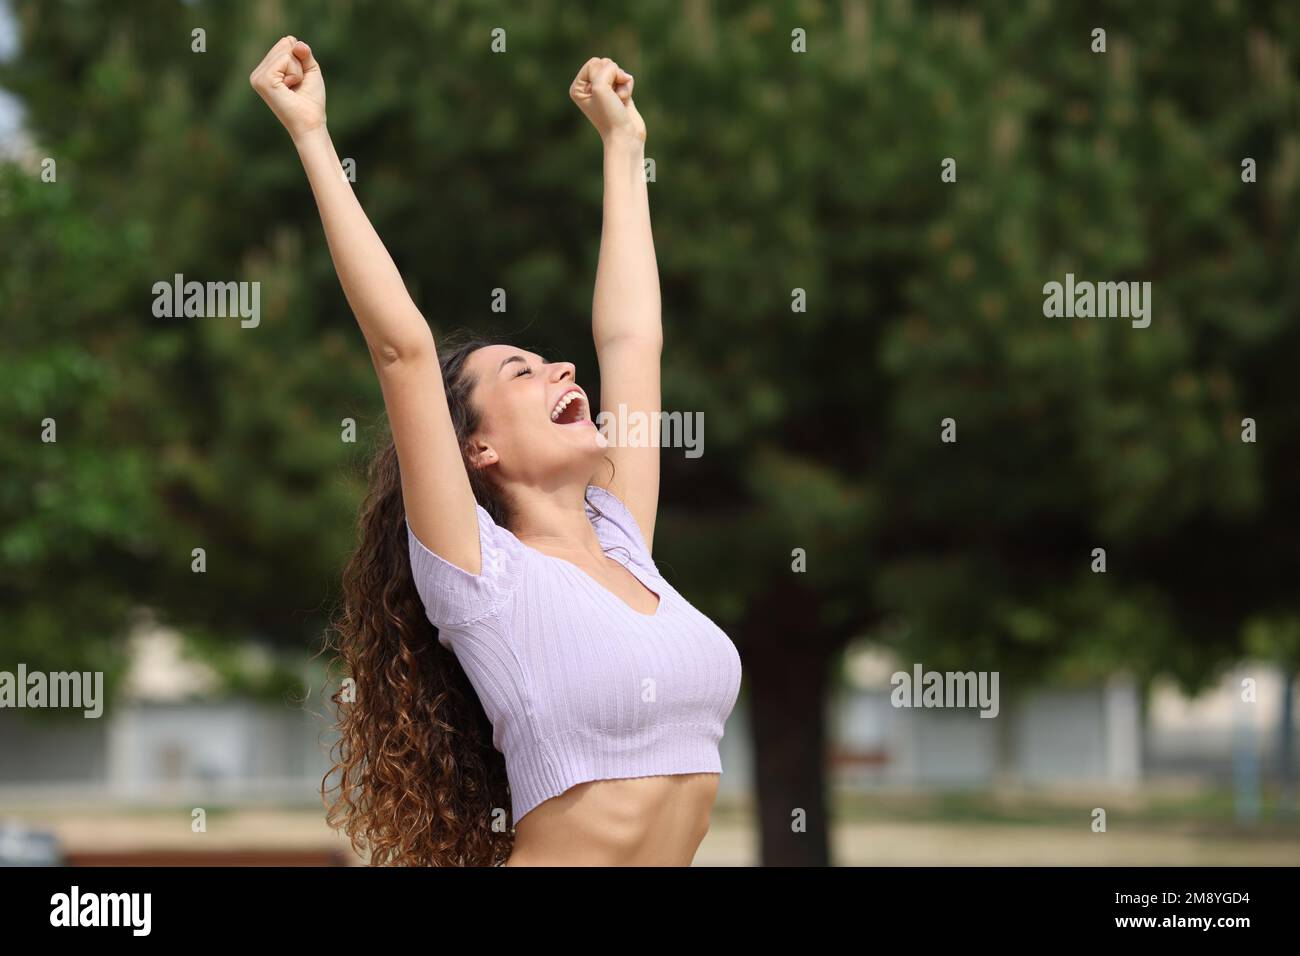 Excited woman raising arms in a park celebrating success Stock Photo